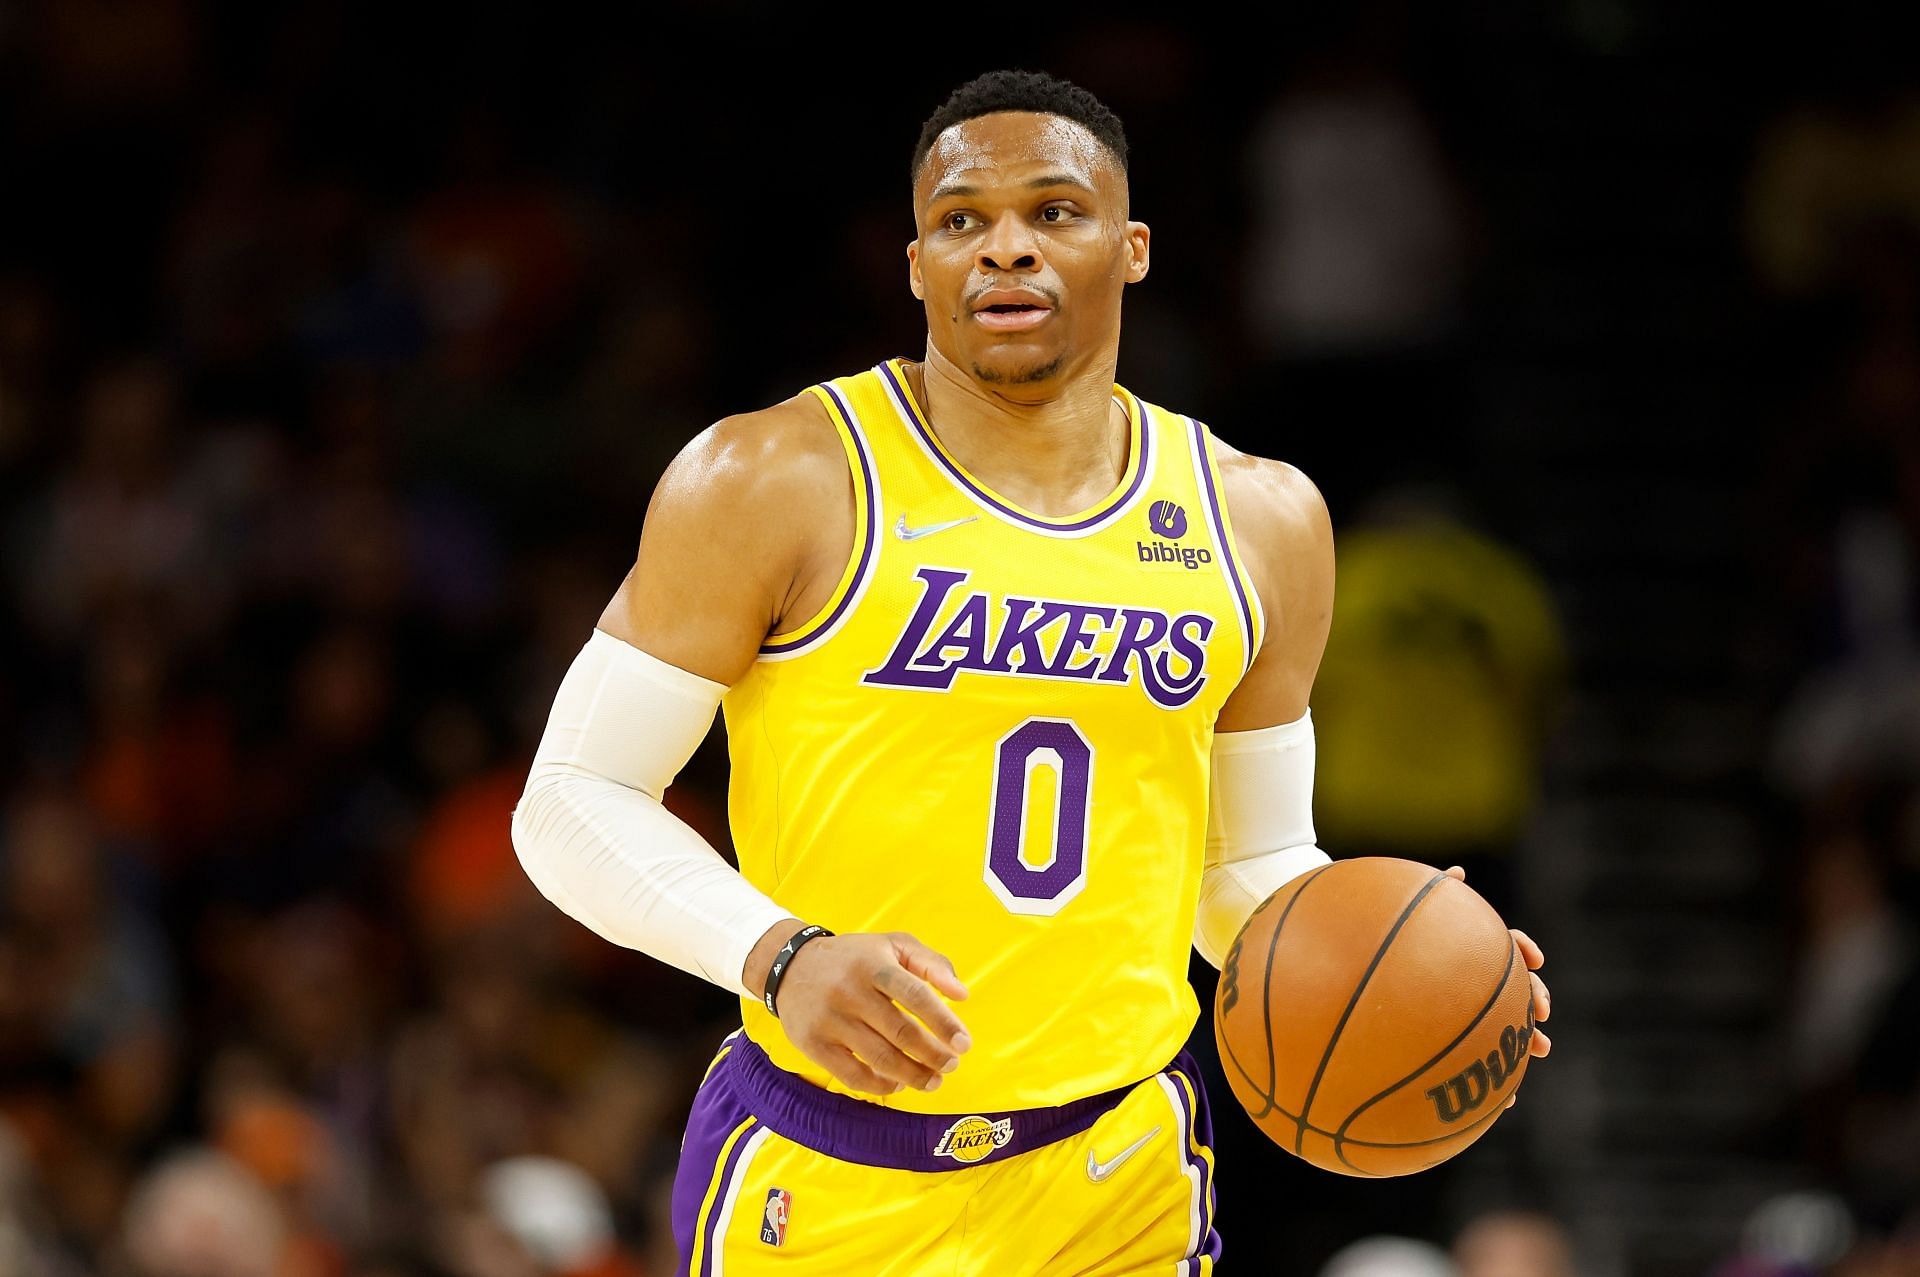 Russell Westbrook of the LA Lakers during the 2021-22 NBA season